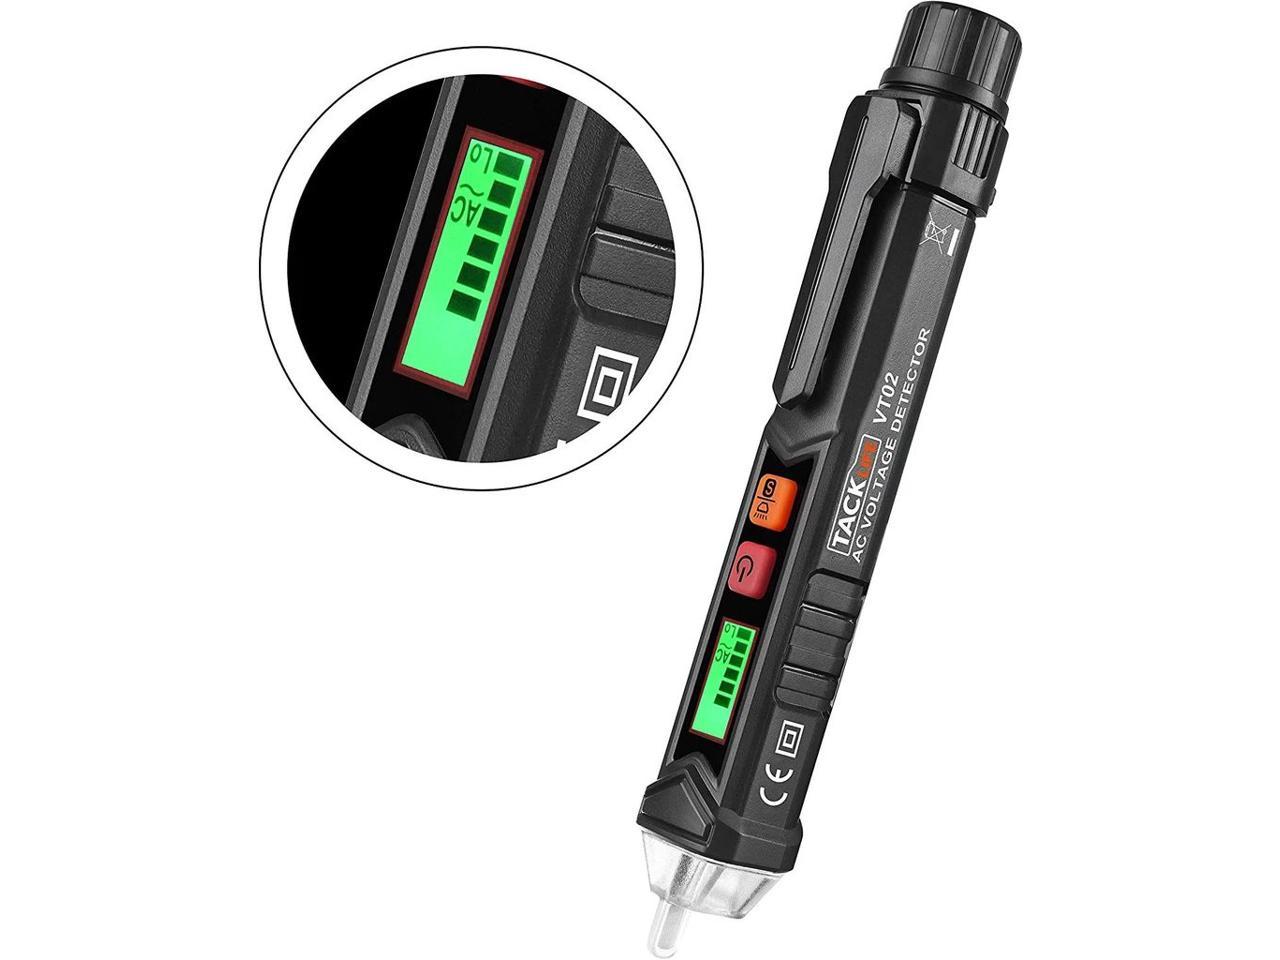 AC Voltage Detector Pen Non-contact Built-in LED light Detects Mains Walls 